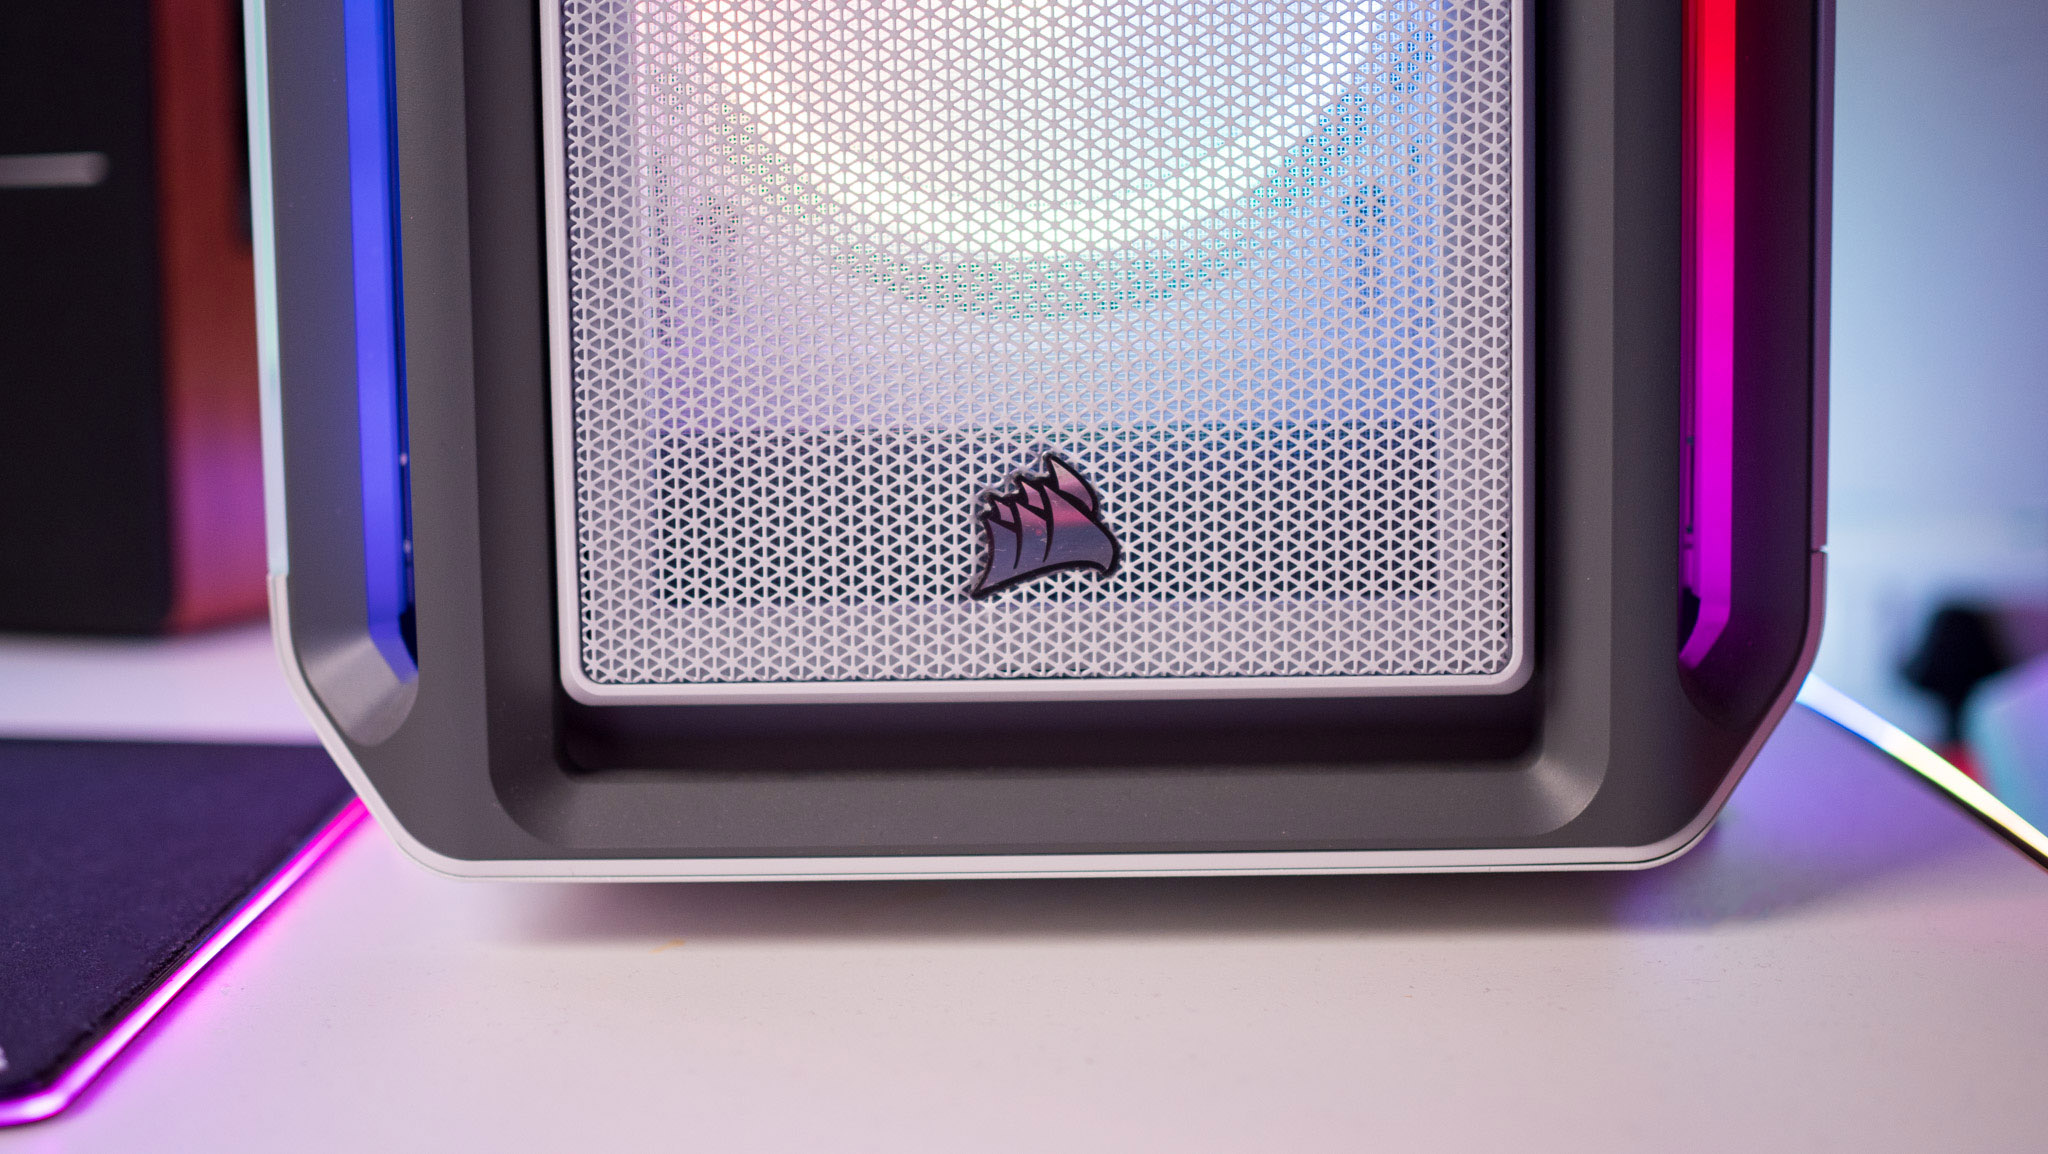 Corsair logo at the bottom of the iCUE 5000T RGB